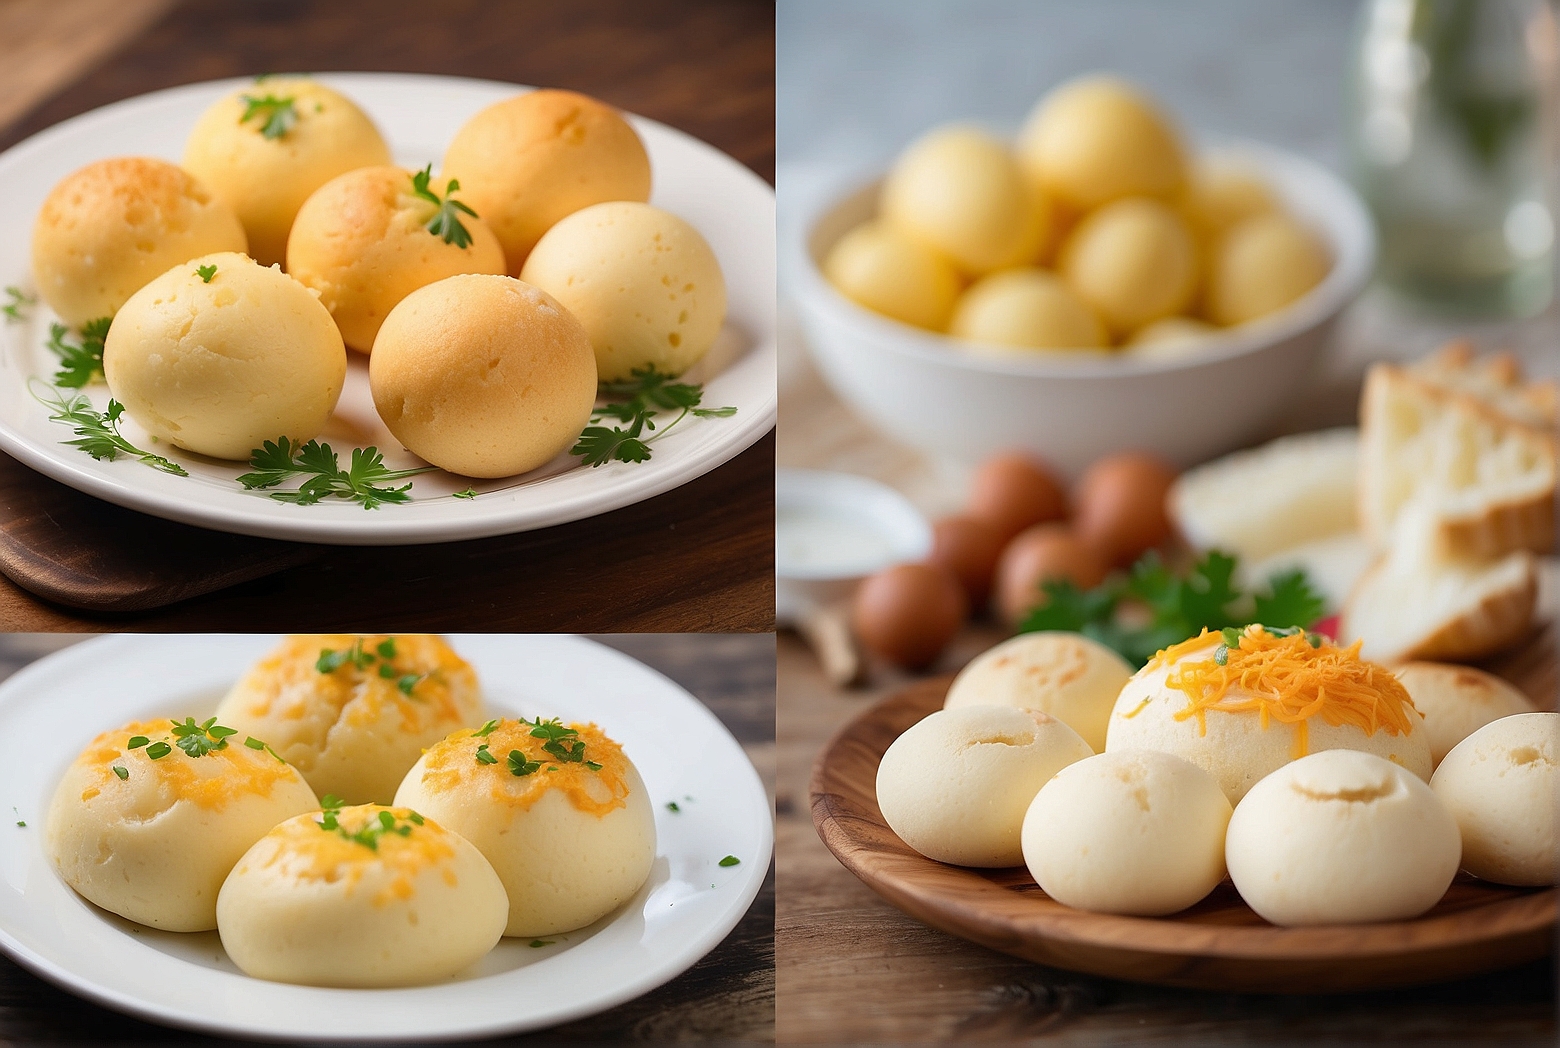 Delicious Side Dishes to Serve with Pão de Queijo